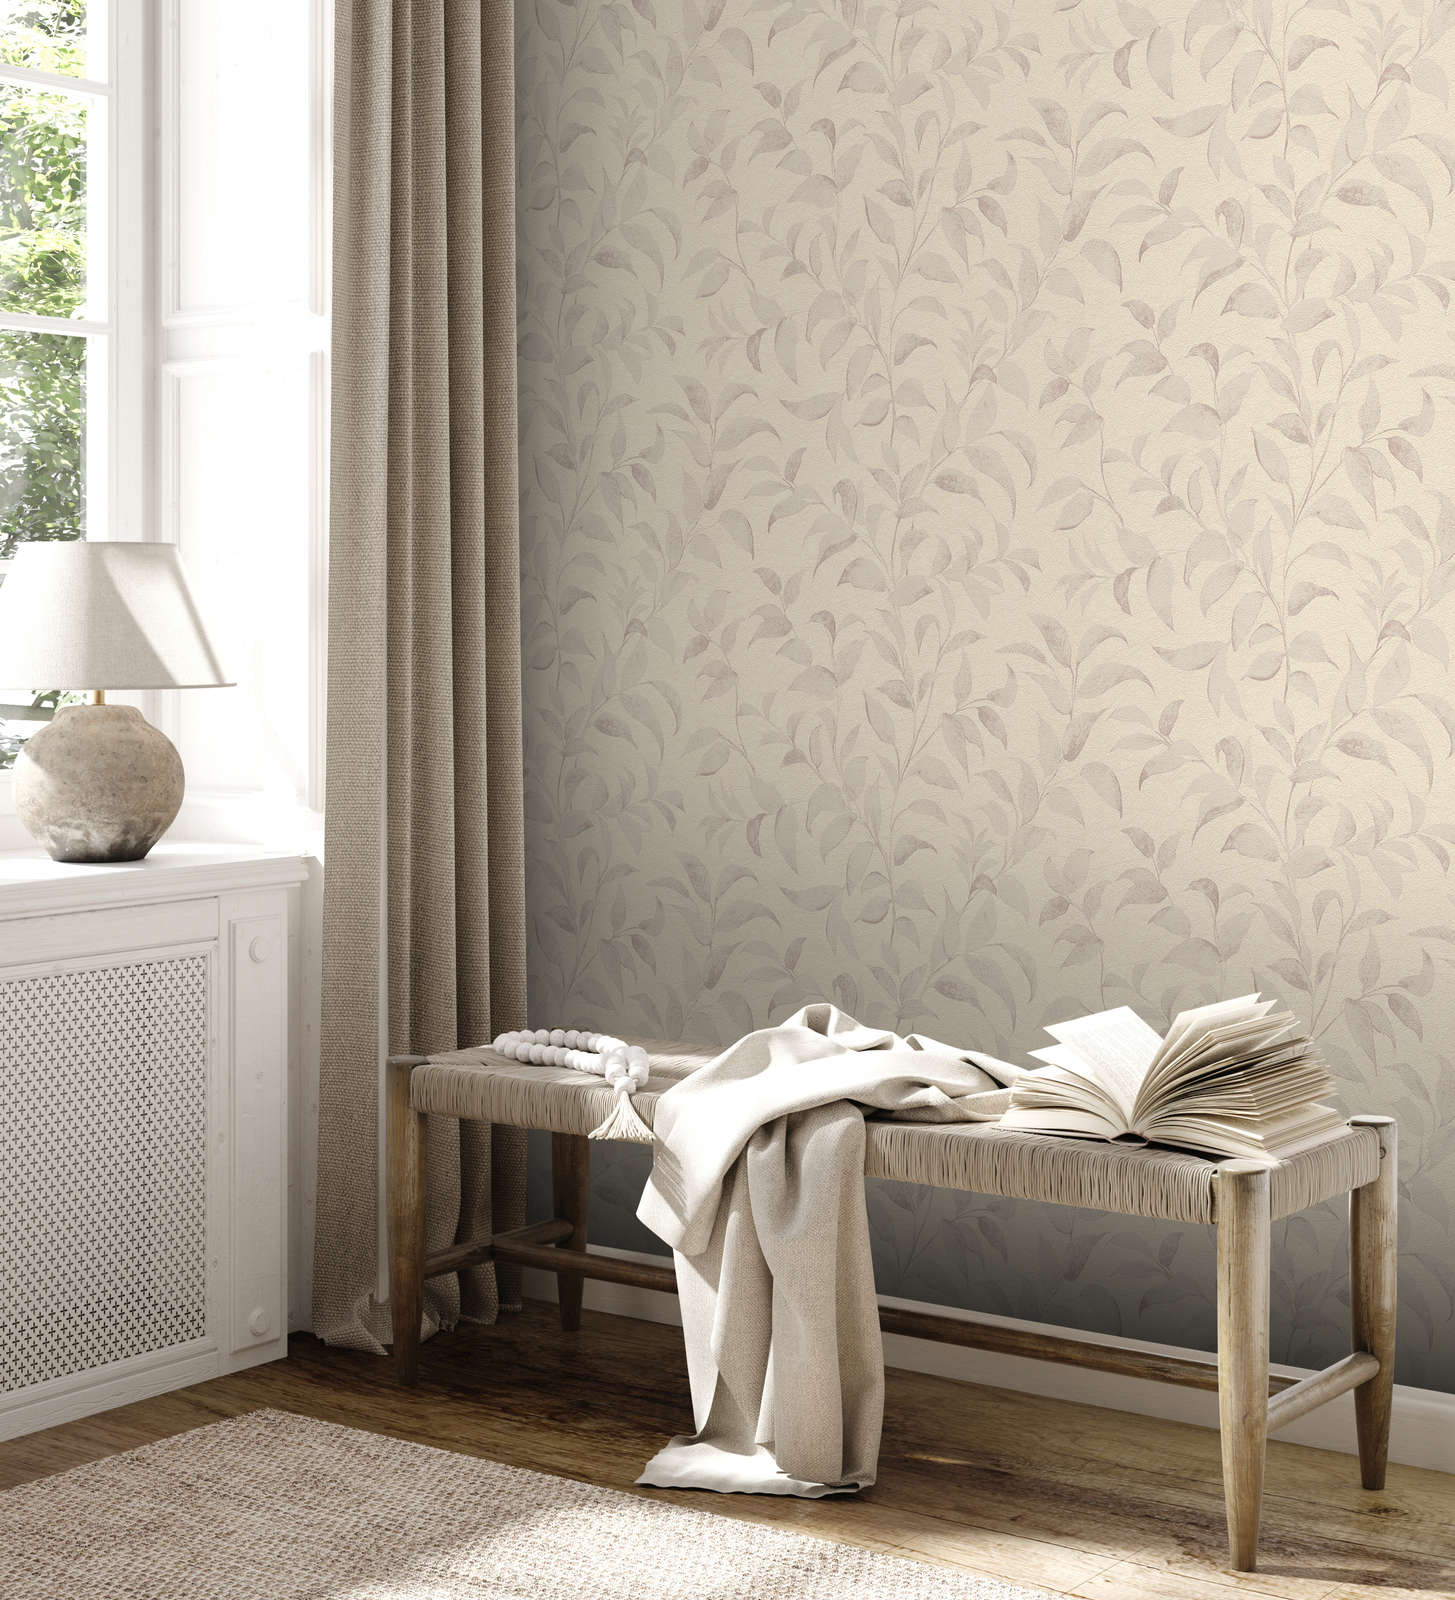             Floral wallpaper with leaves shimmering textured - grey, silver
        